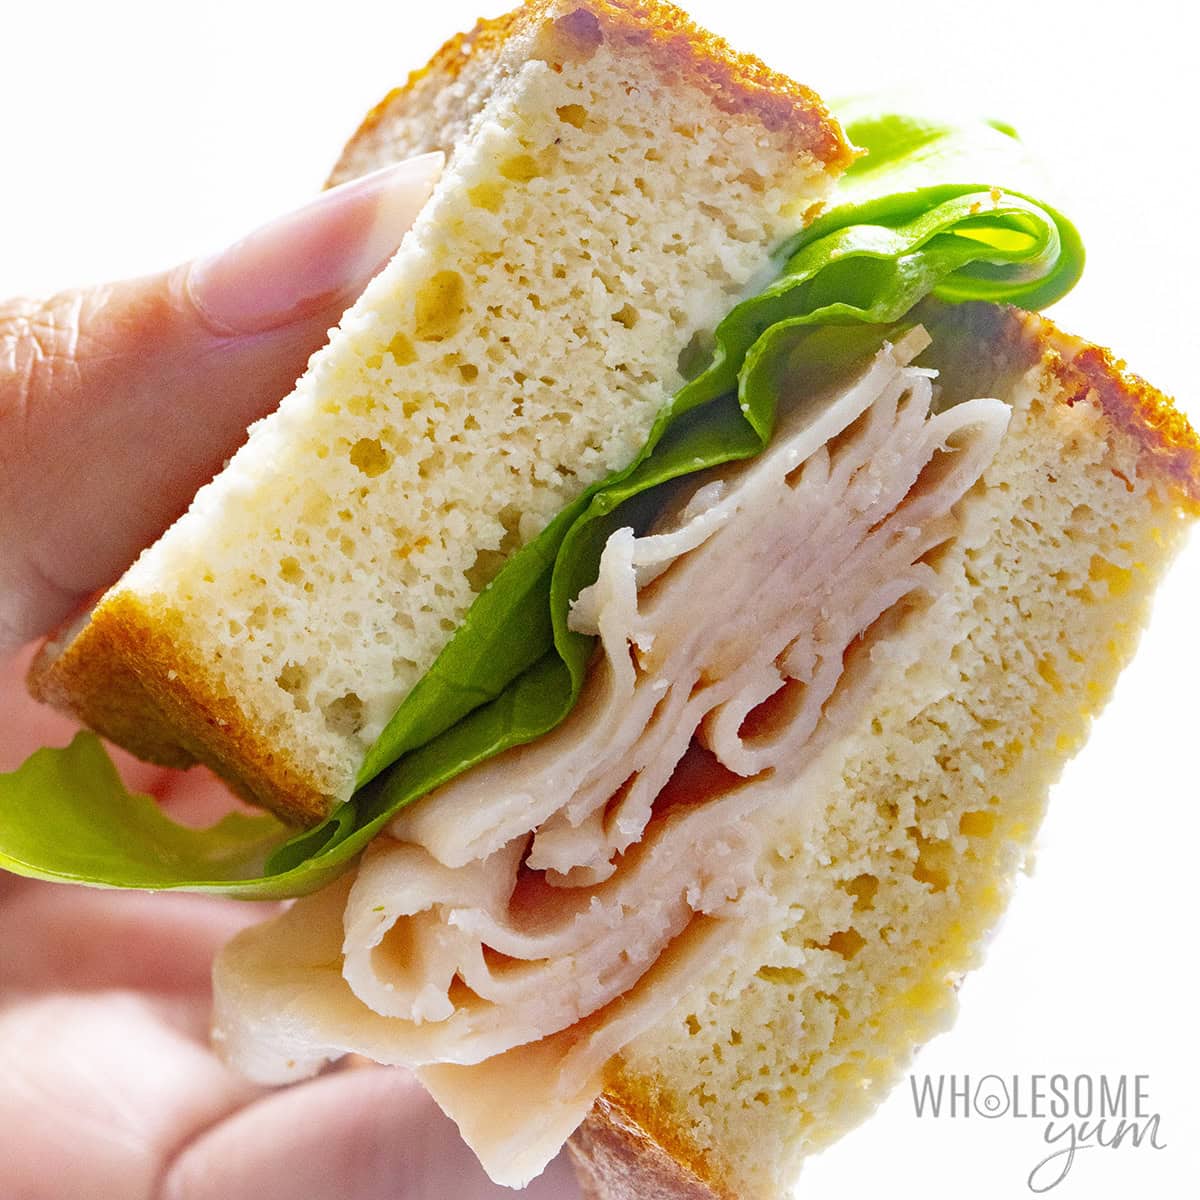 Holding a keto sandwich with turkey, lettuce, and mayo.